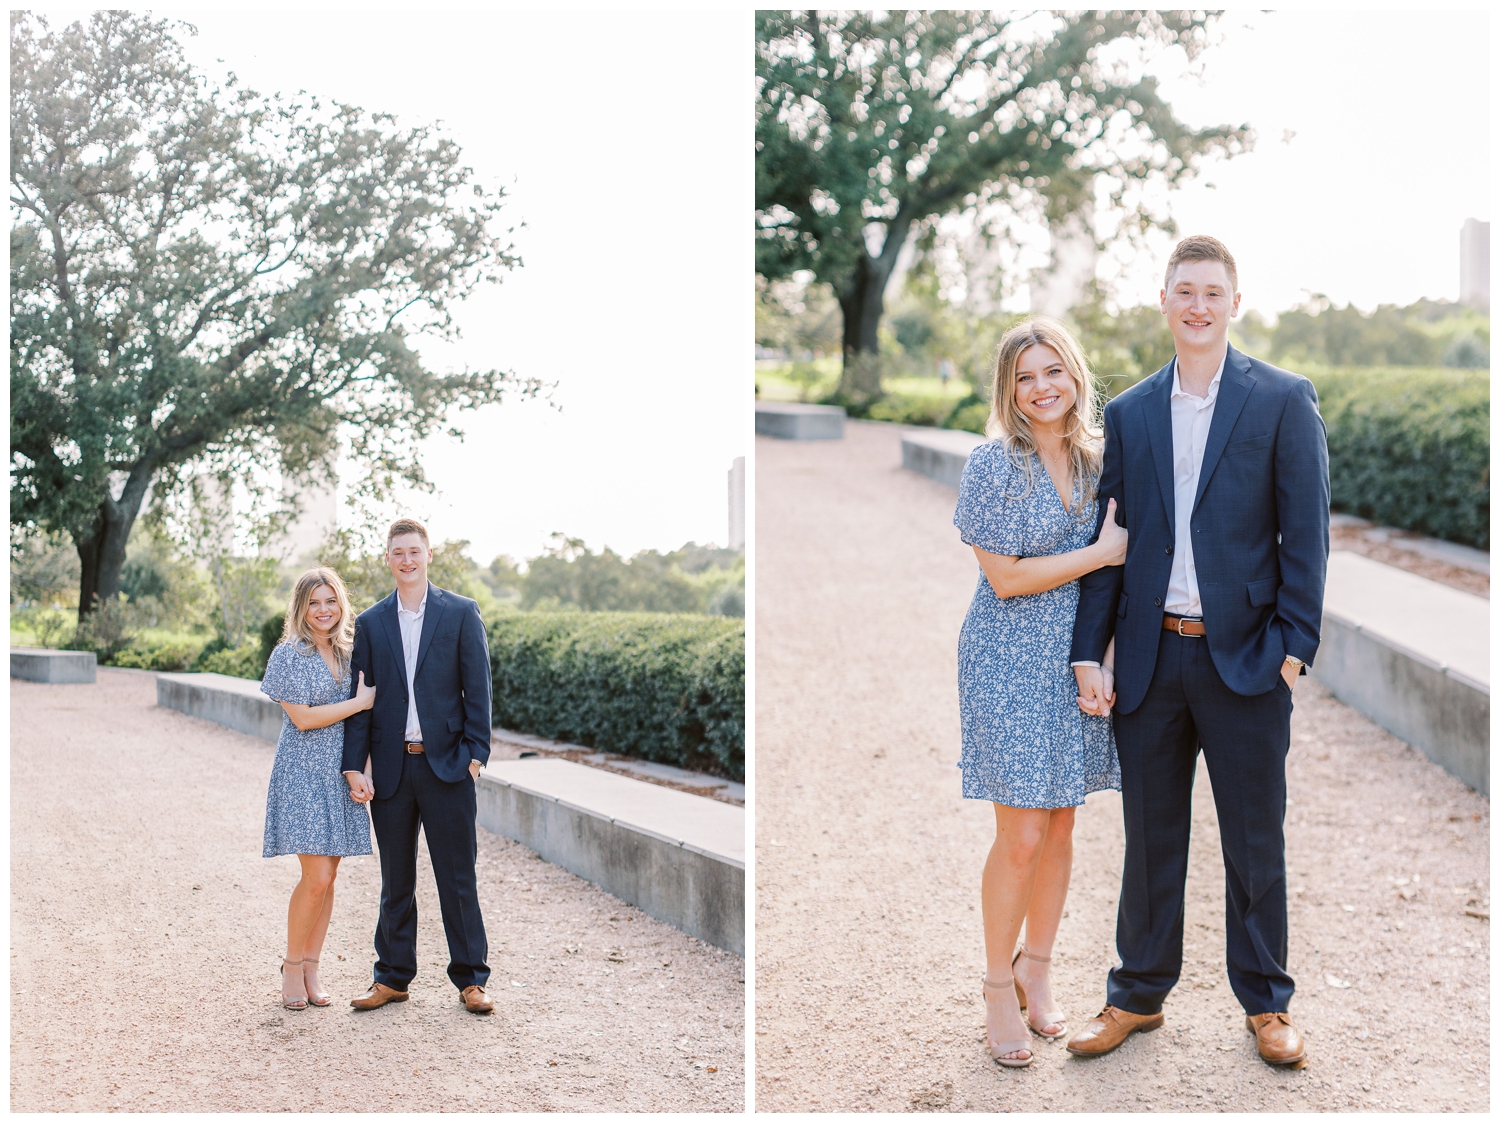 standing portraits of engaged couple on pathway at Eleanor Tinsley park in Houston Texas